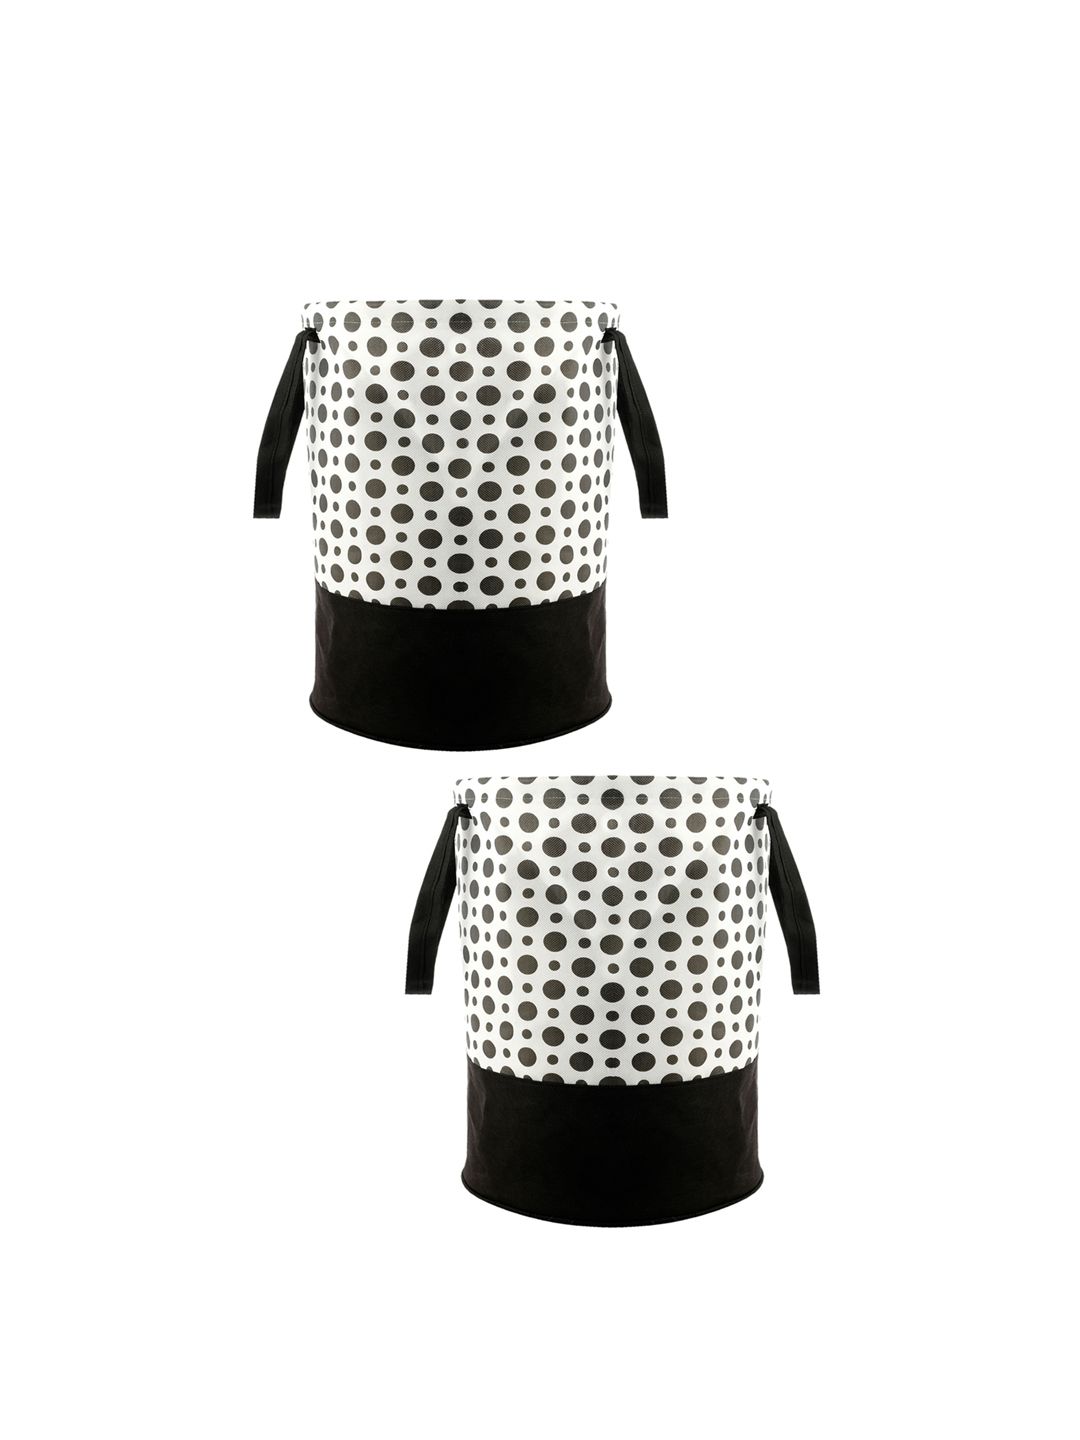 Kuber Industries Set Of 2 Black & White Polka Dot Print Waterproof Canvas Laundry Bags 45 L Price in India